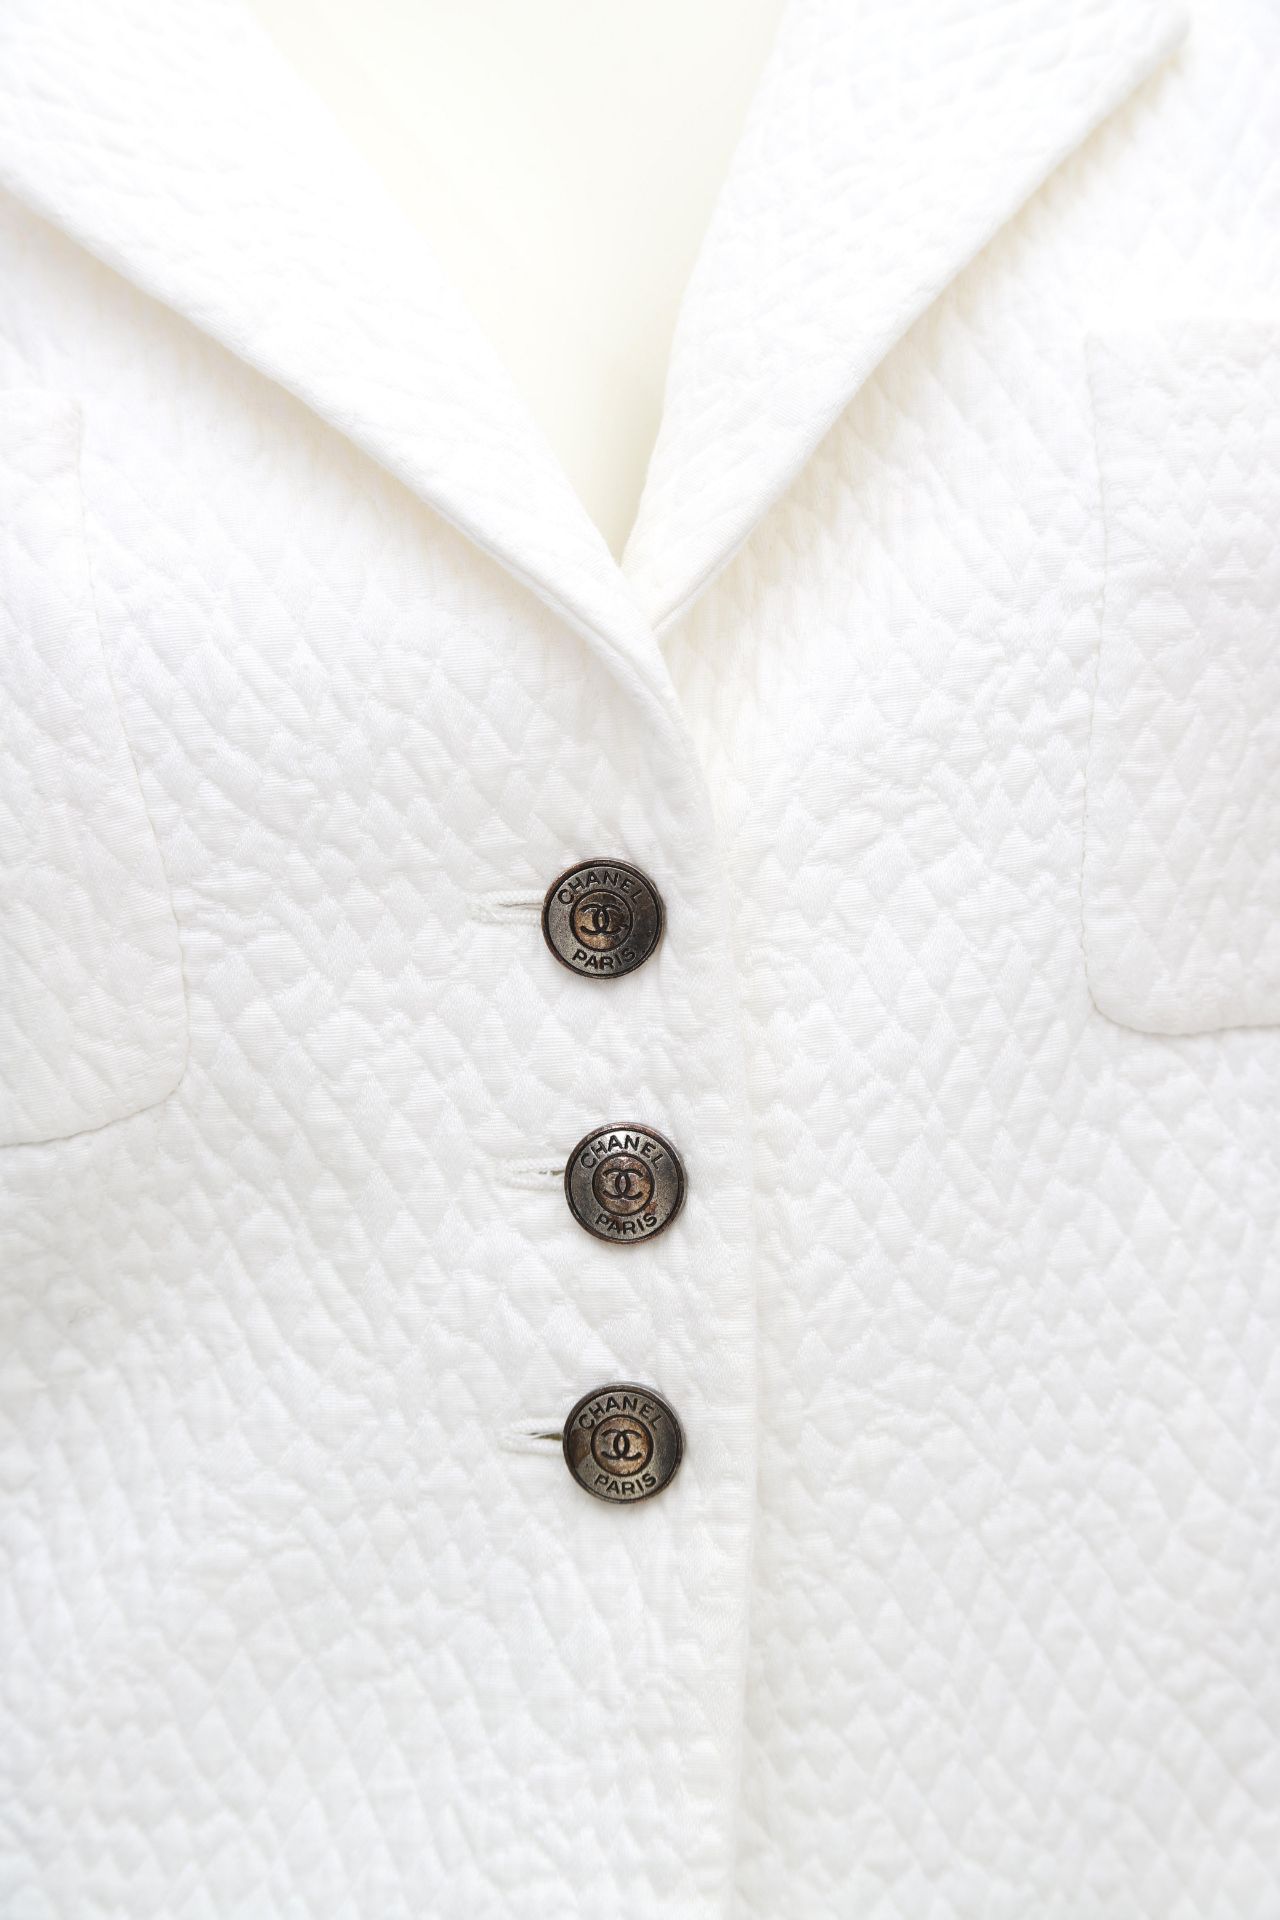 Chanel Boutique white jacket with a quilted pattern. The jacket has two external pockets, a - Image 5 of 6